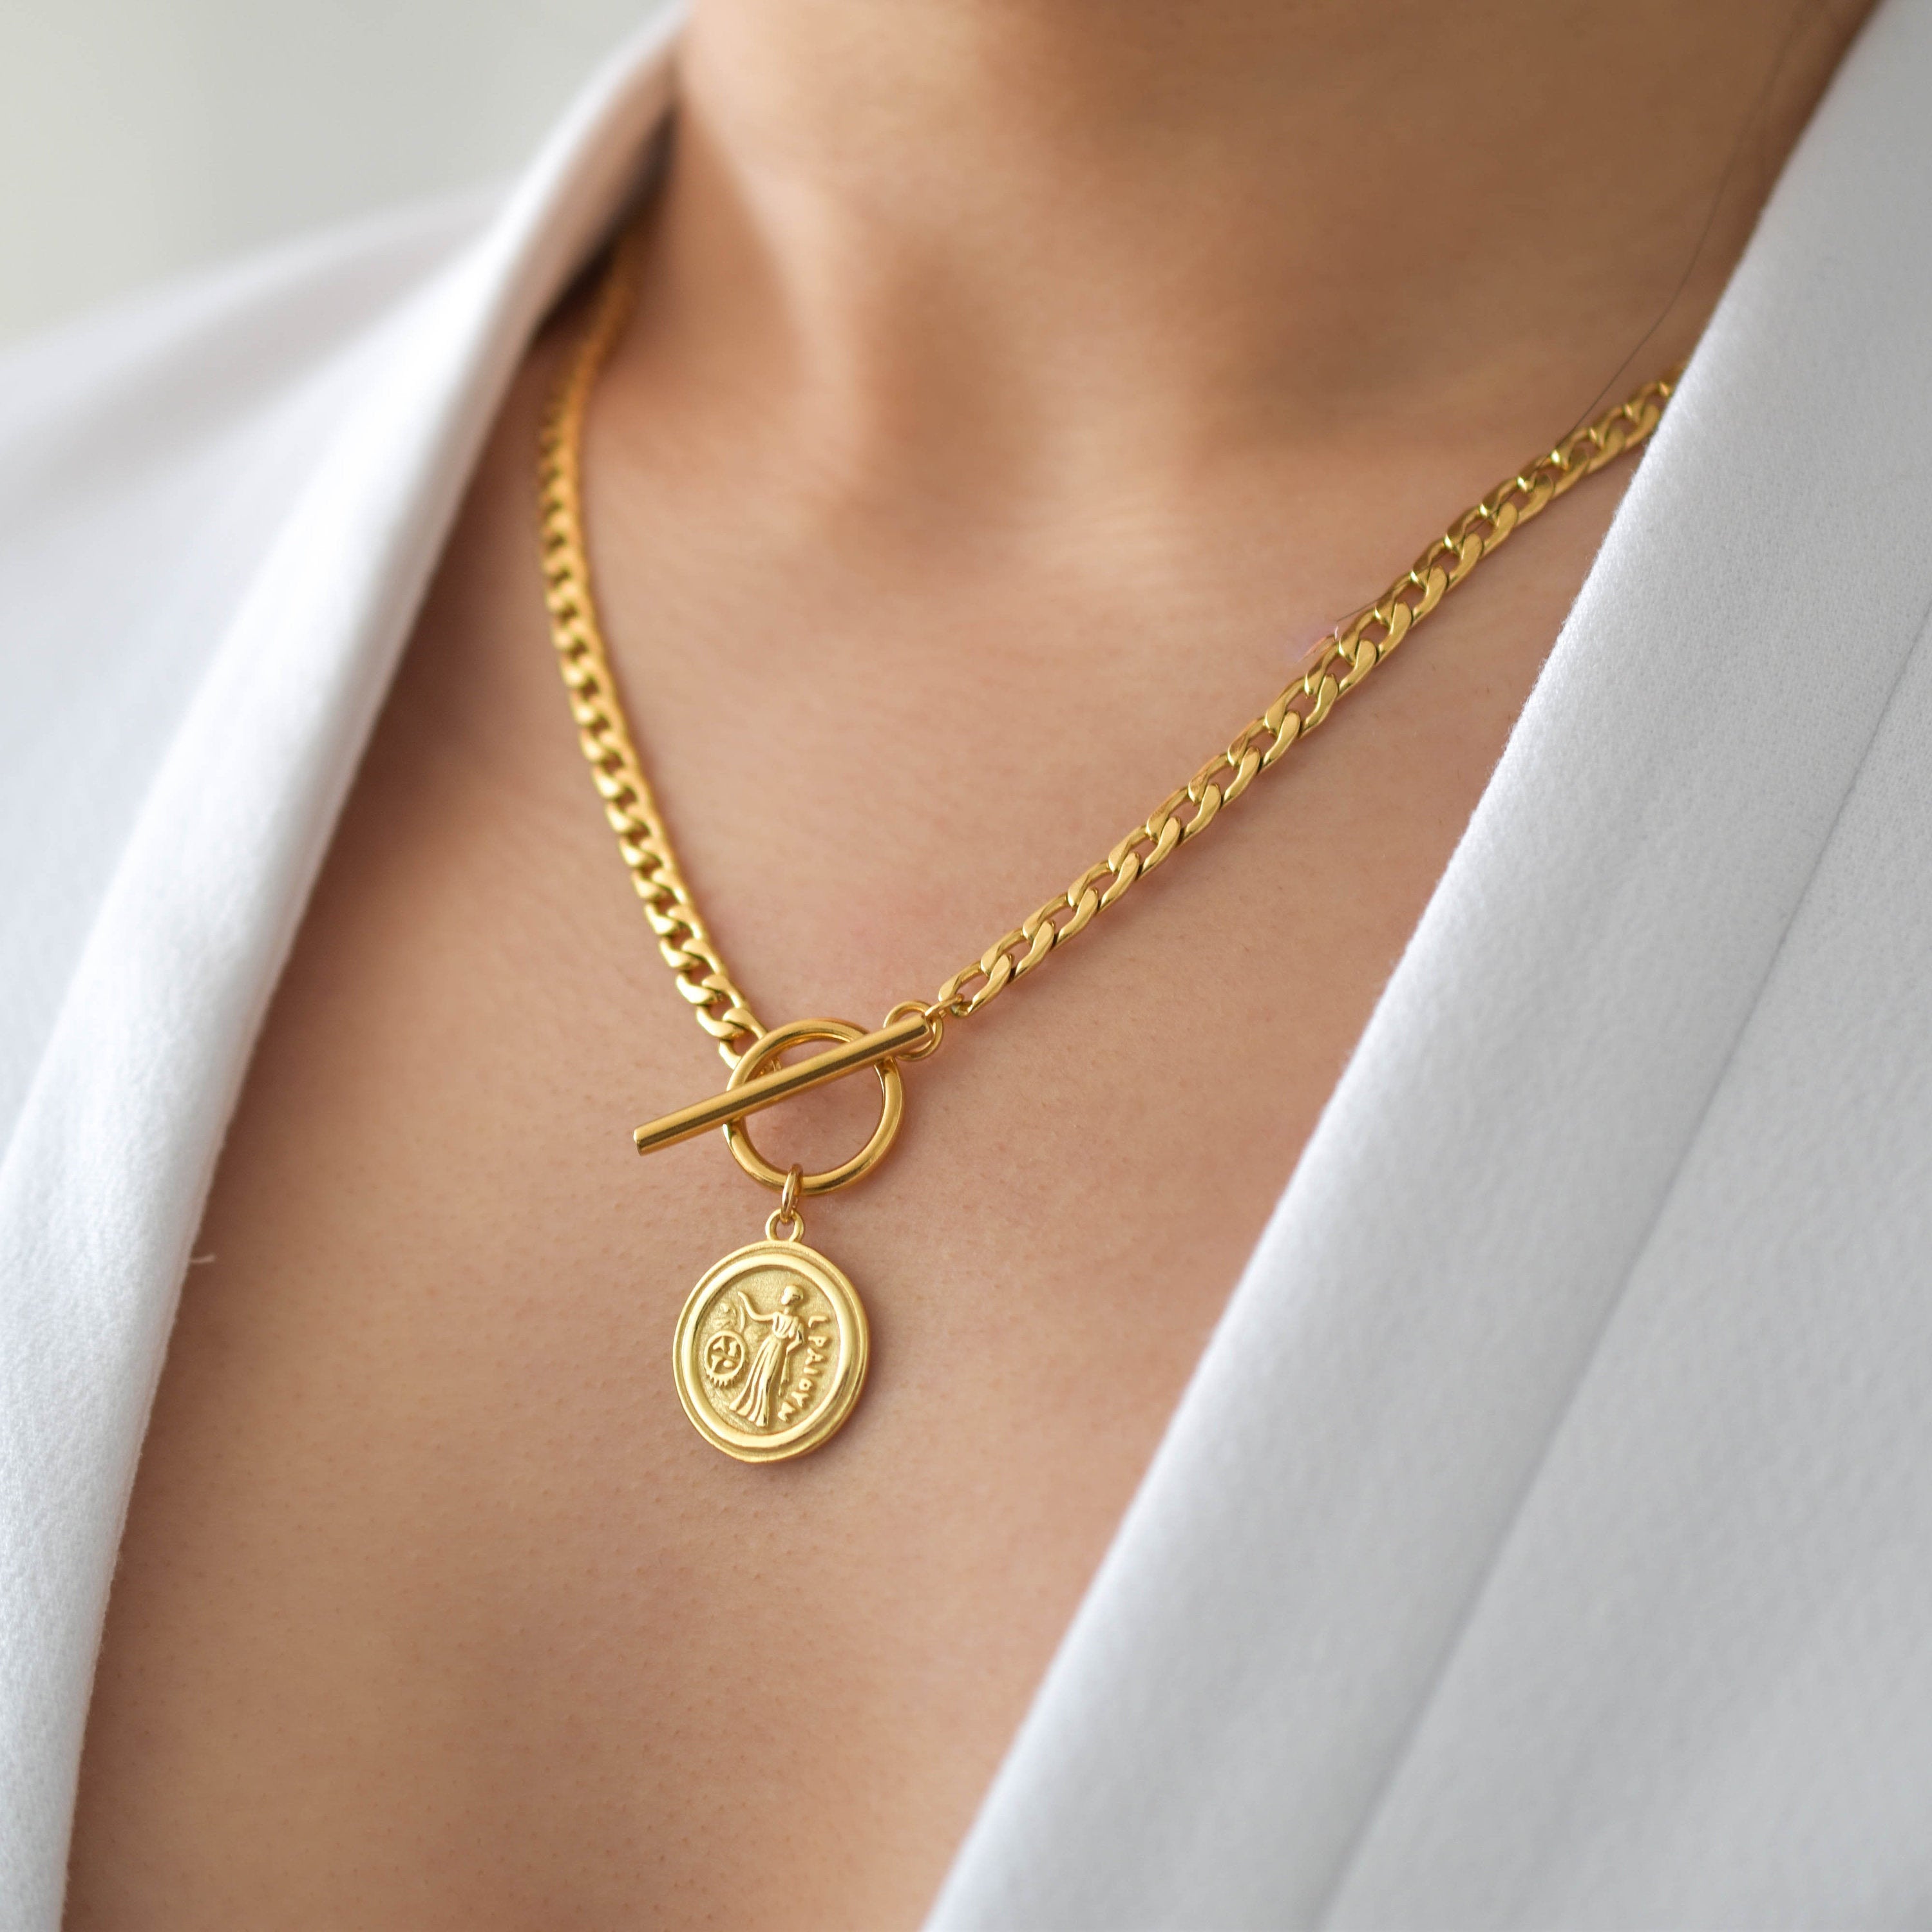 gold coin necklace pendant